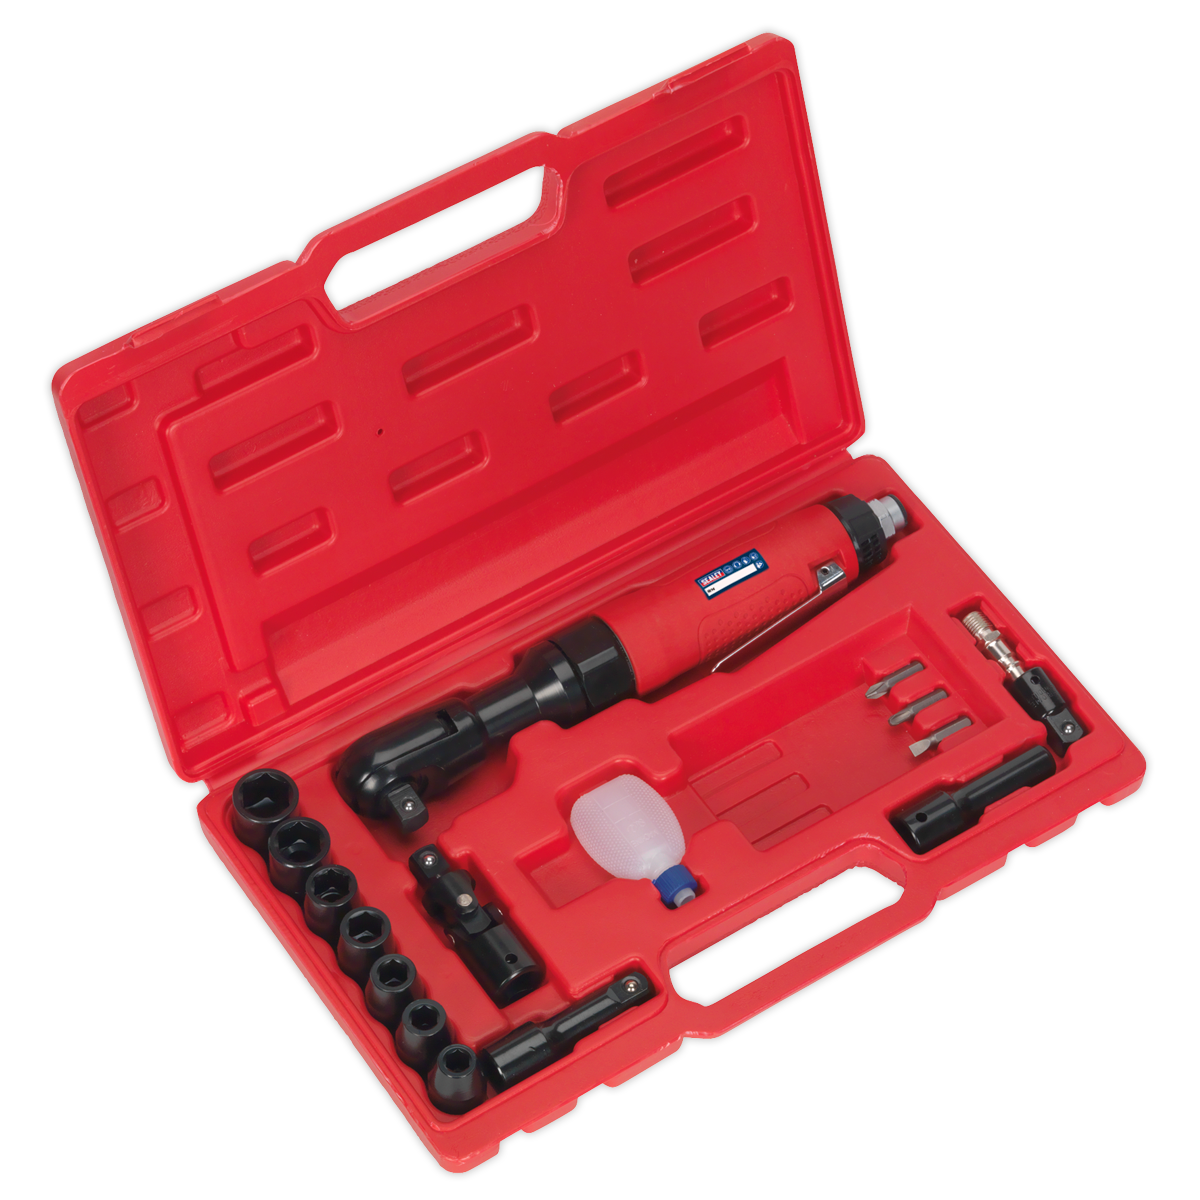 Air Ratchet Wrench Kit 1/2"Sq Drive